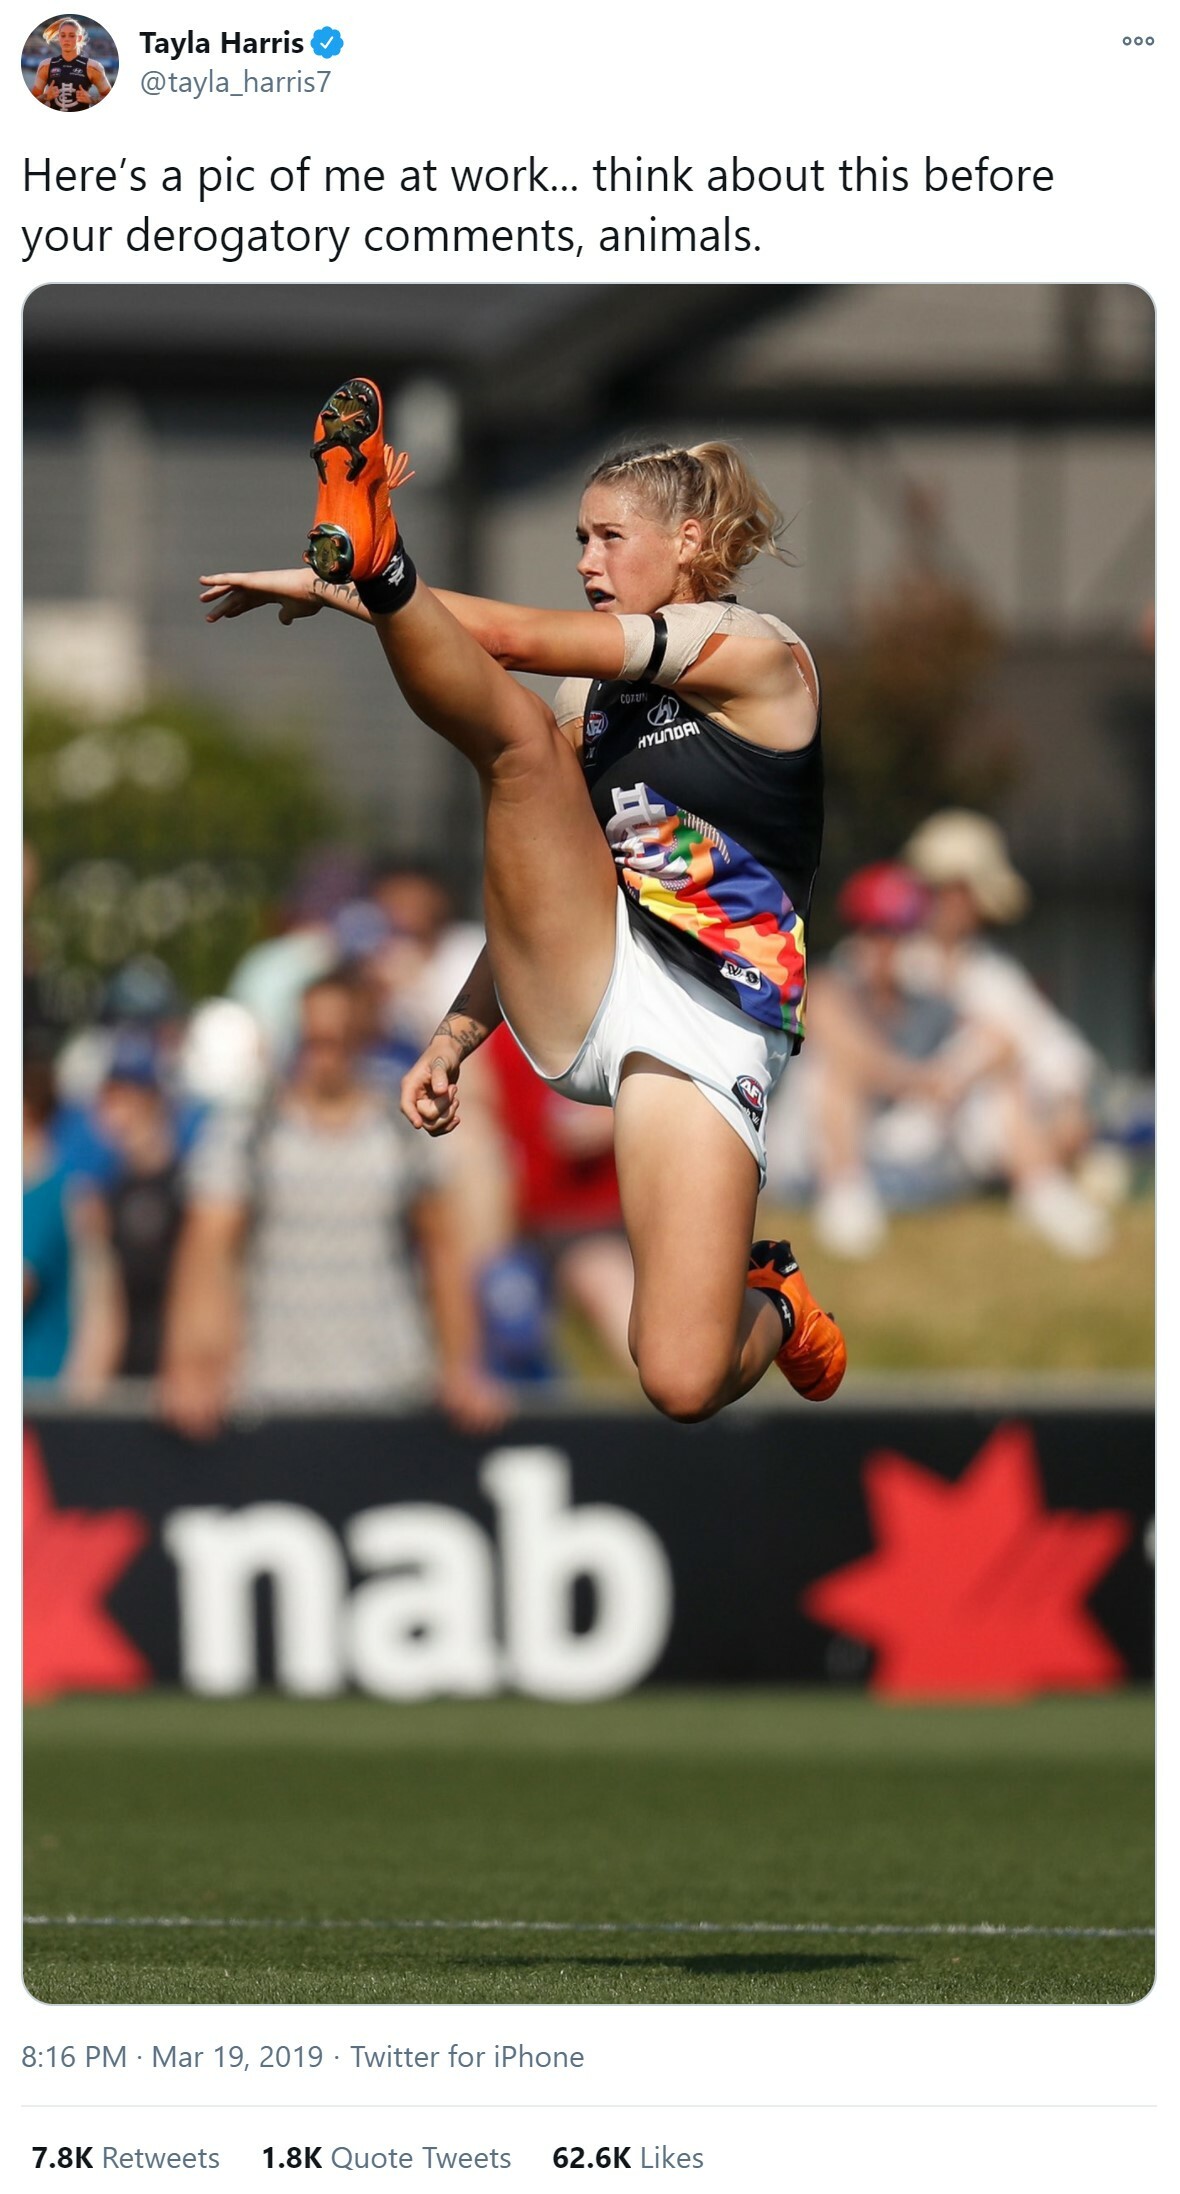 Tweet from Tayla Harris with a photo of her playing AFL with her right leg high up in the air. The caption says Here's a pic of me at work...think about this before your derogatory comments, animals.